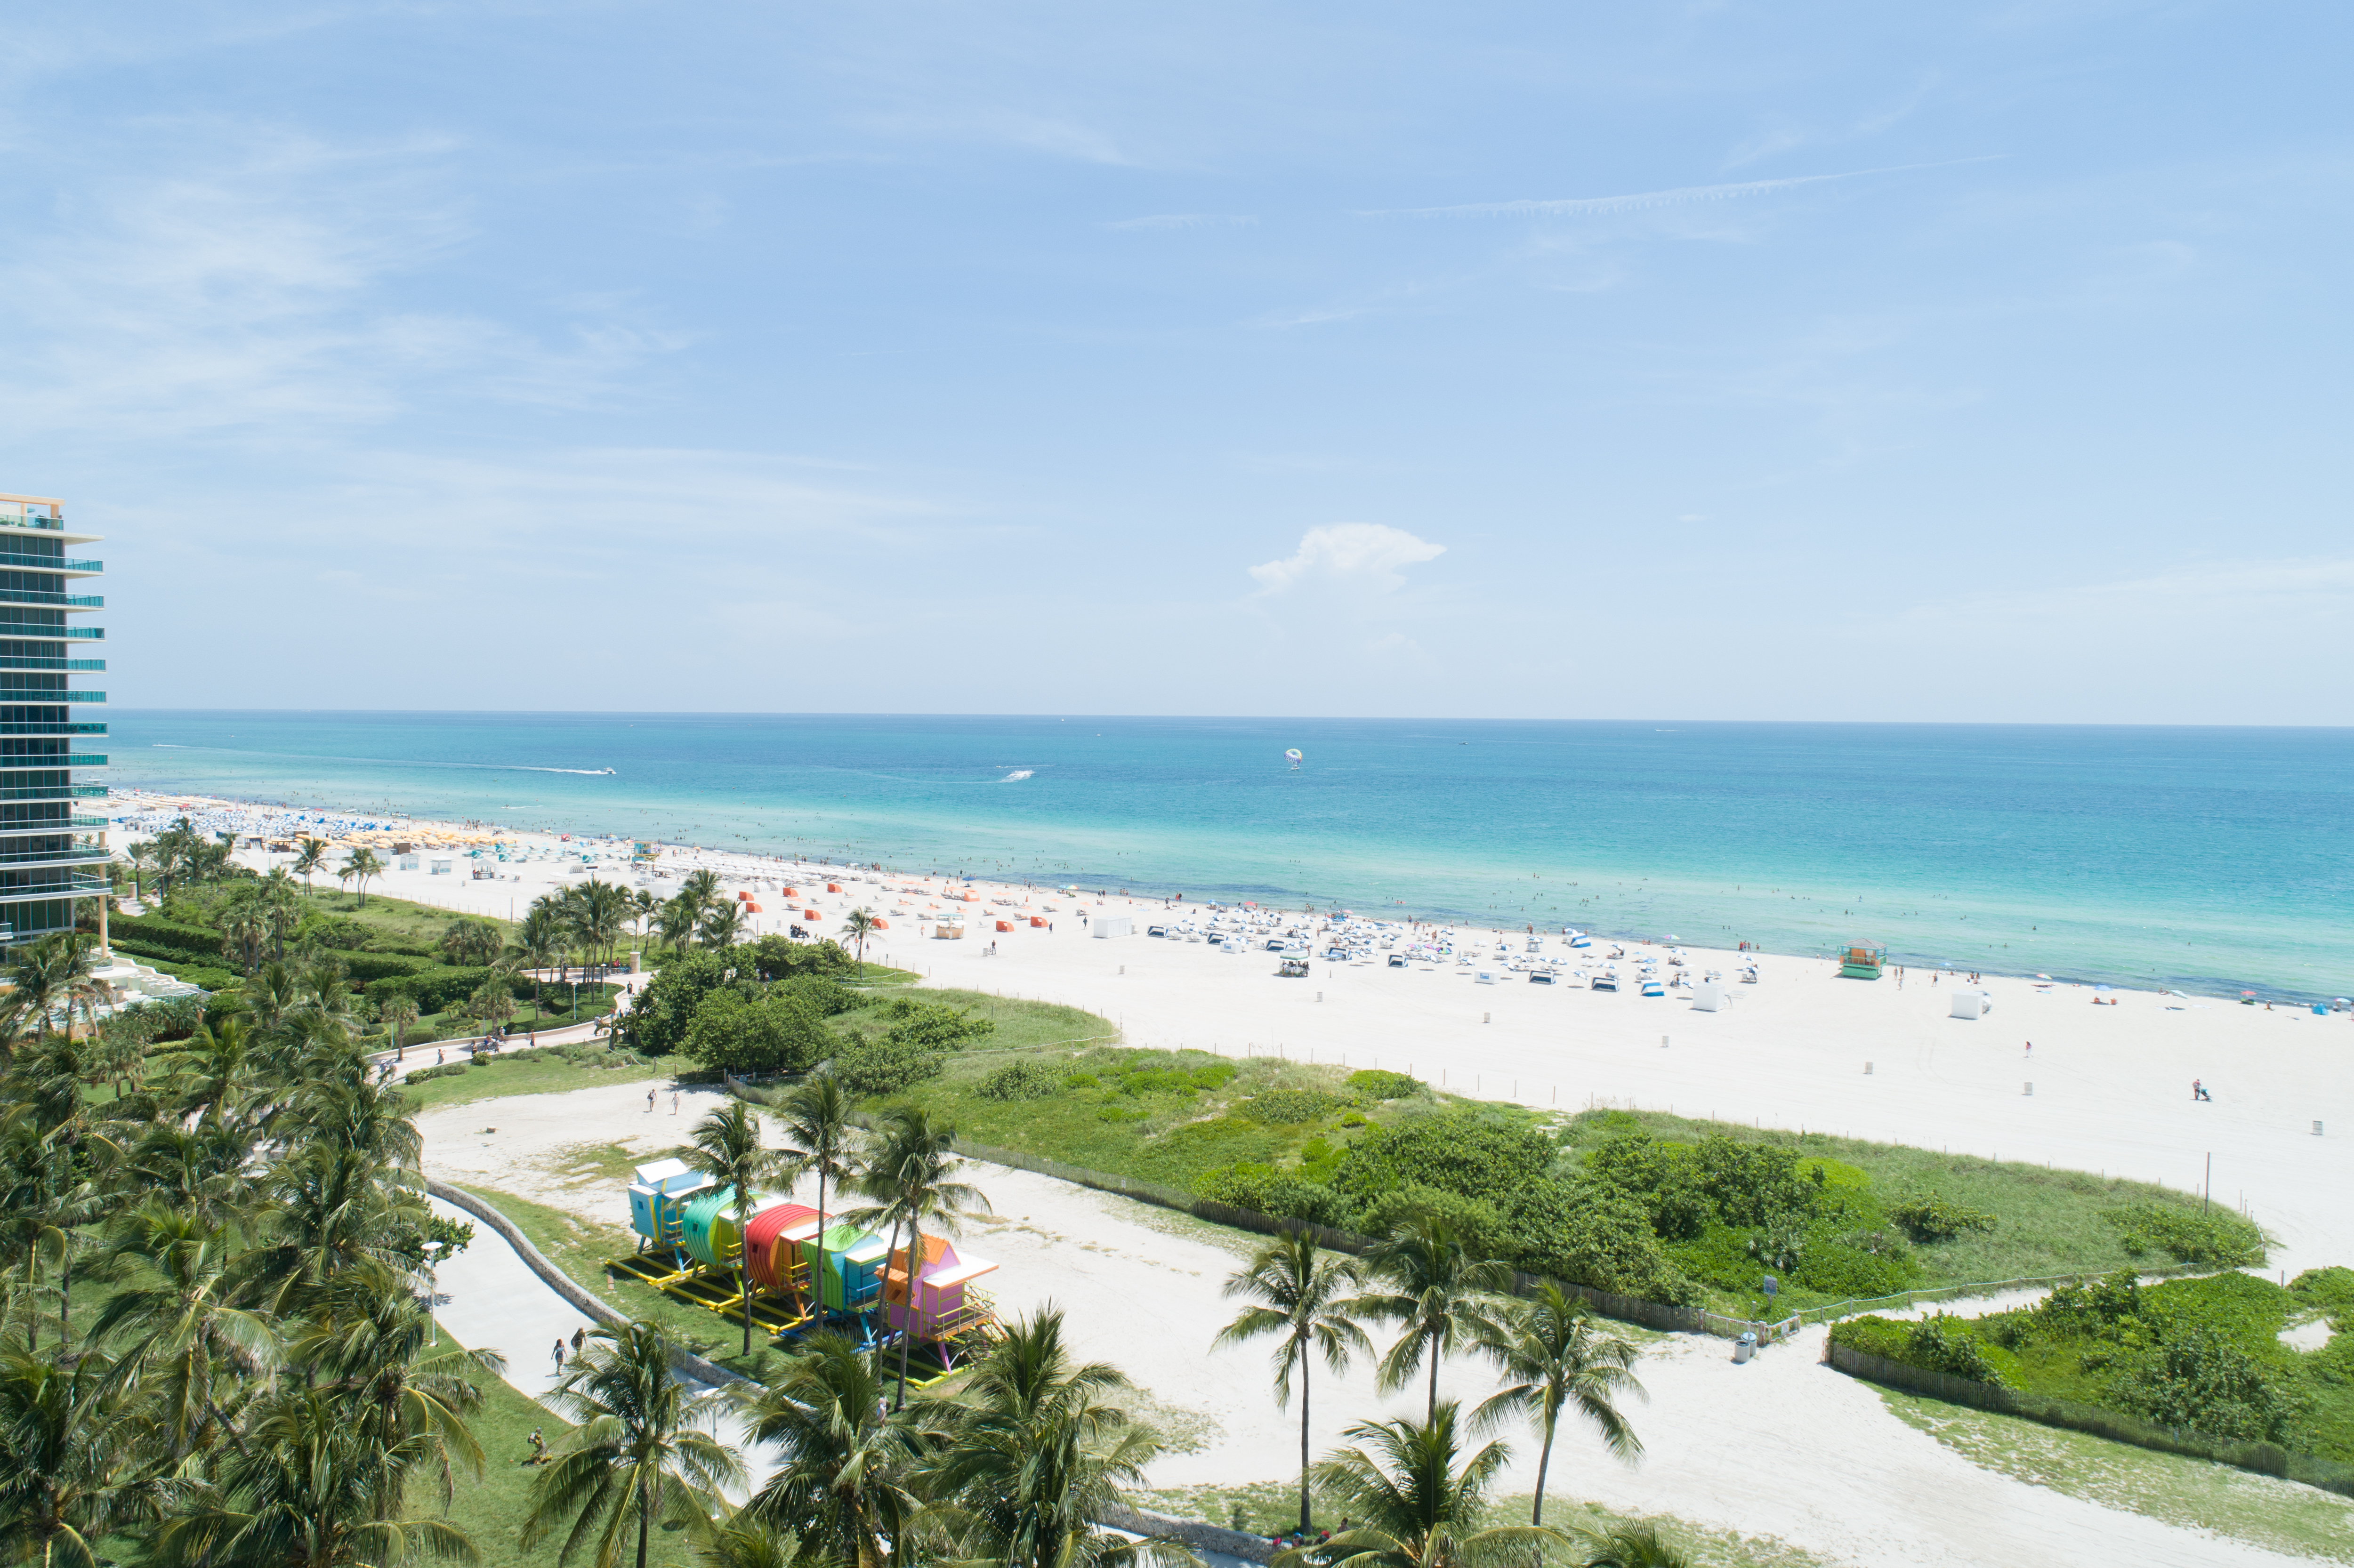 Local Miami Beach Hotels Offer Summer Deals and Unique Experiences